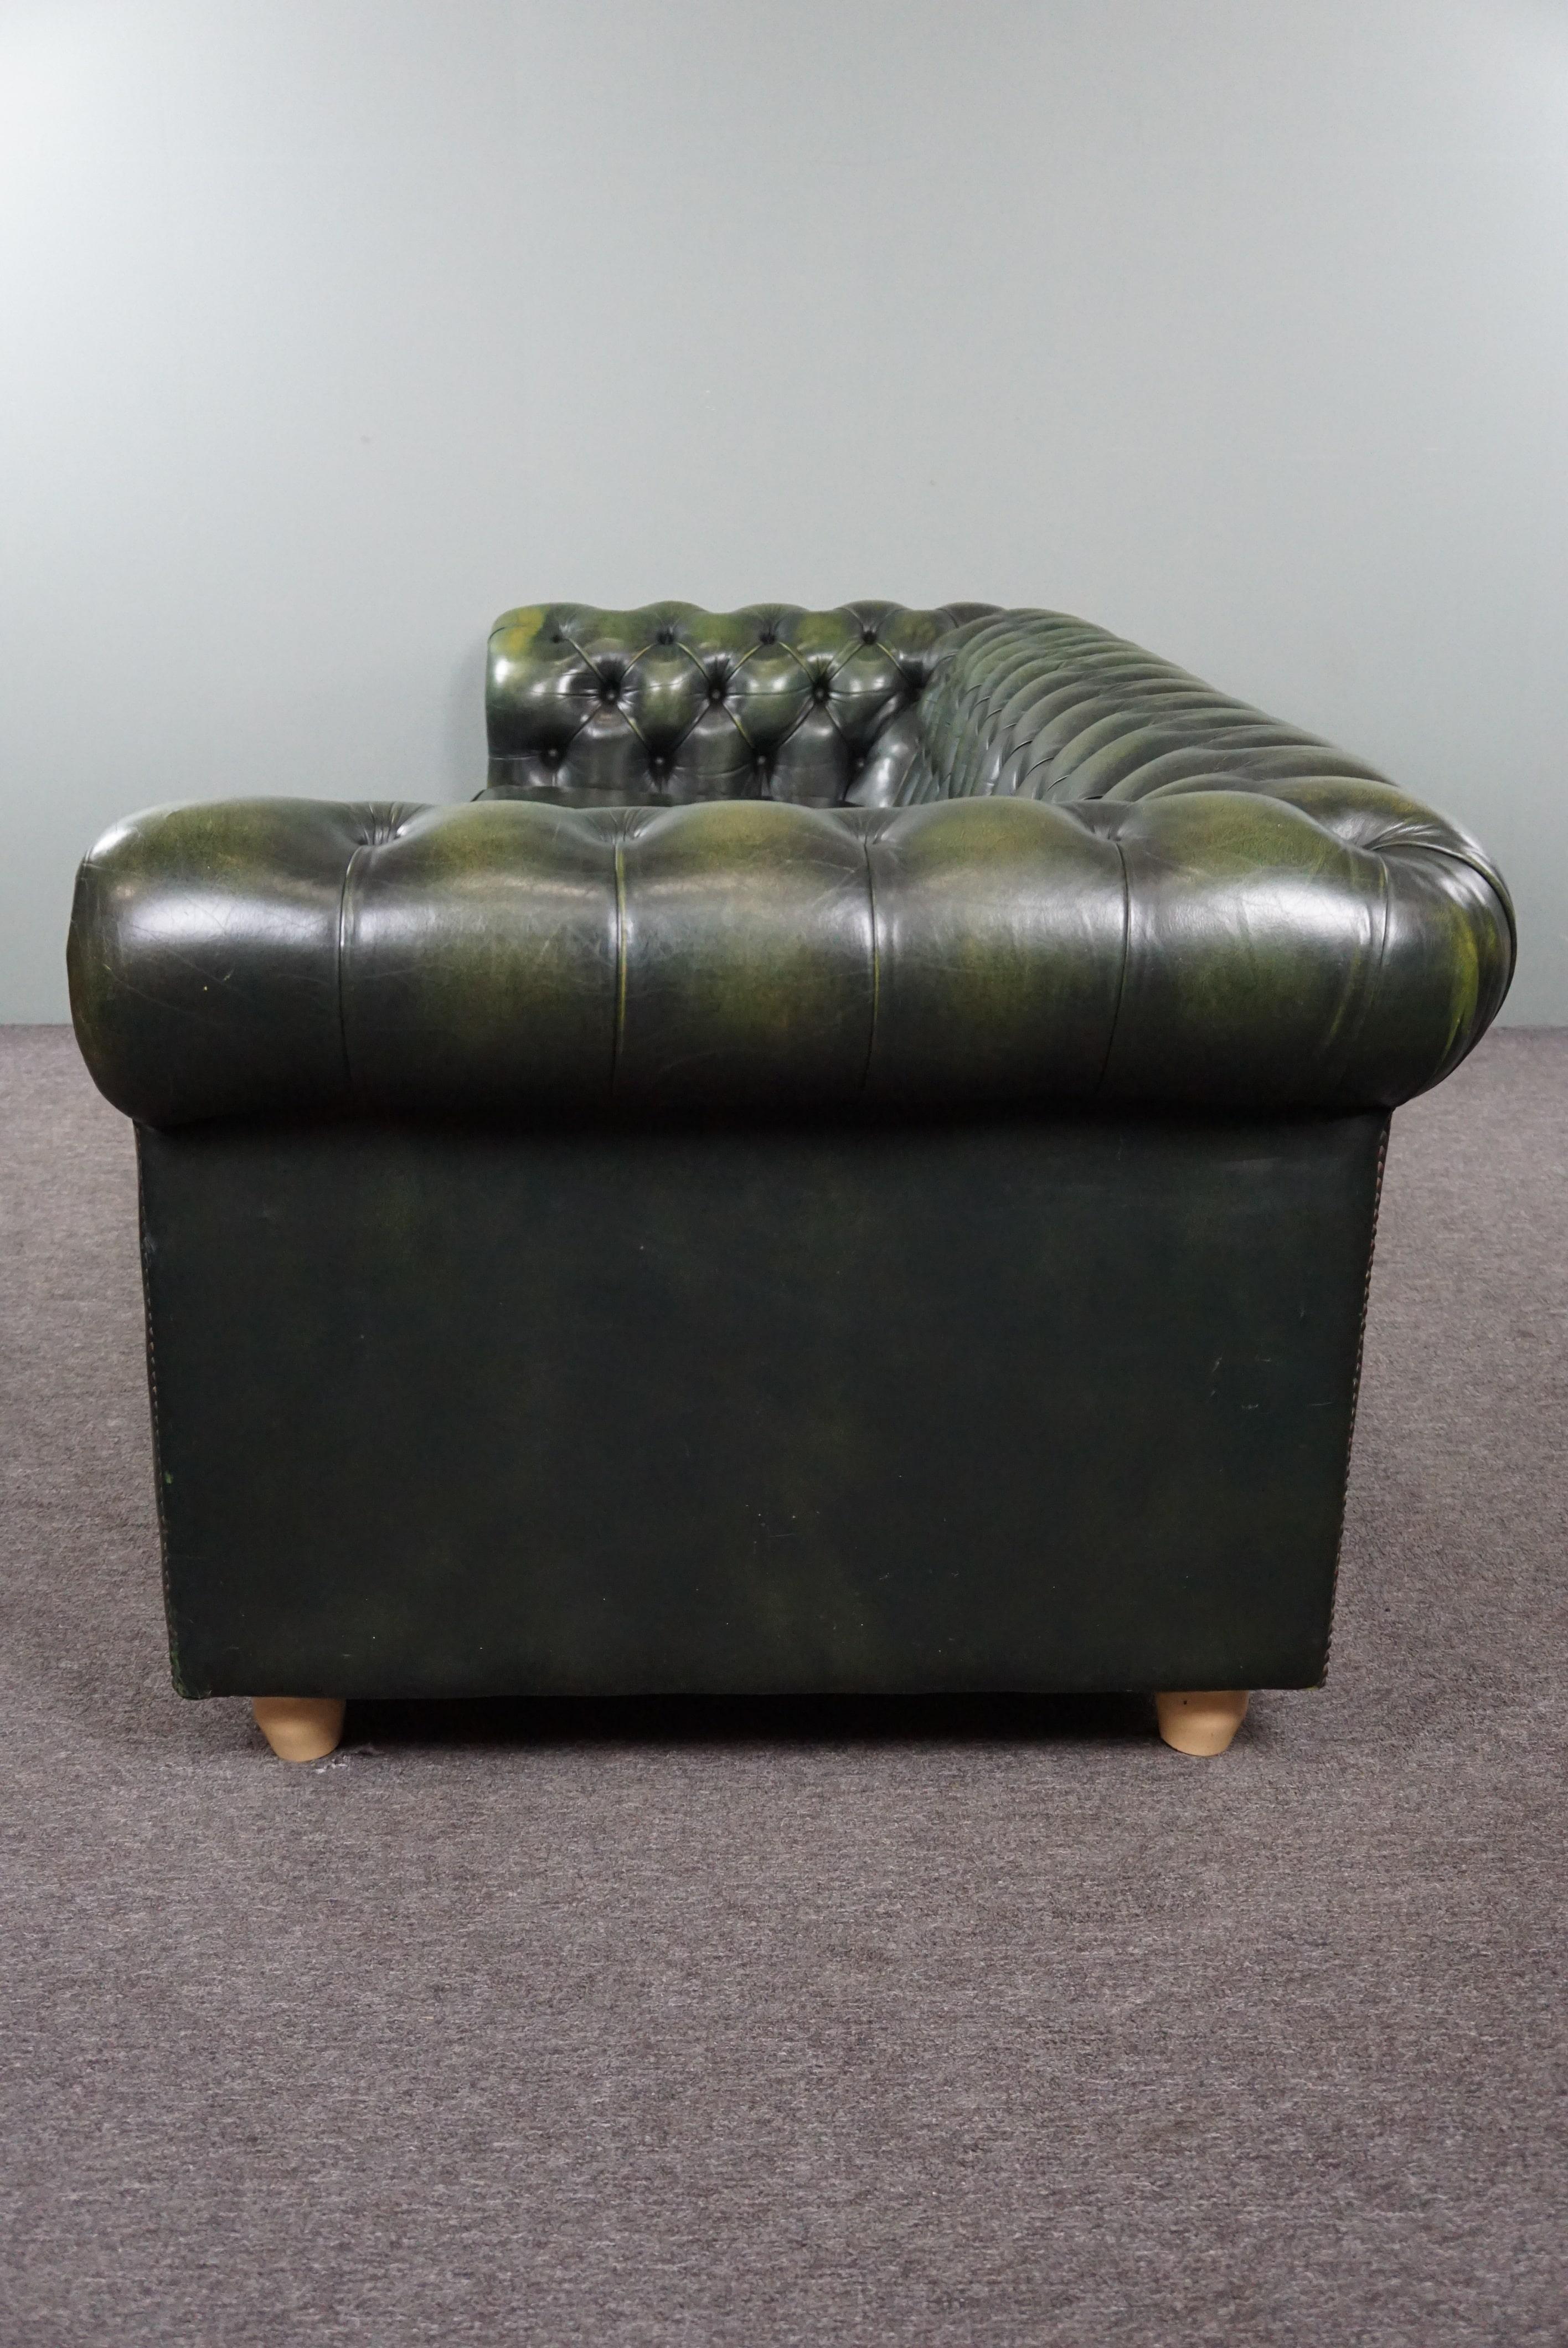 Cowhide Beautifully colored spacious green cow leather Chesterfield sofa, 3.5 seater